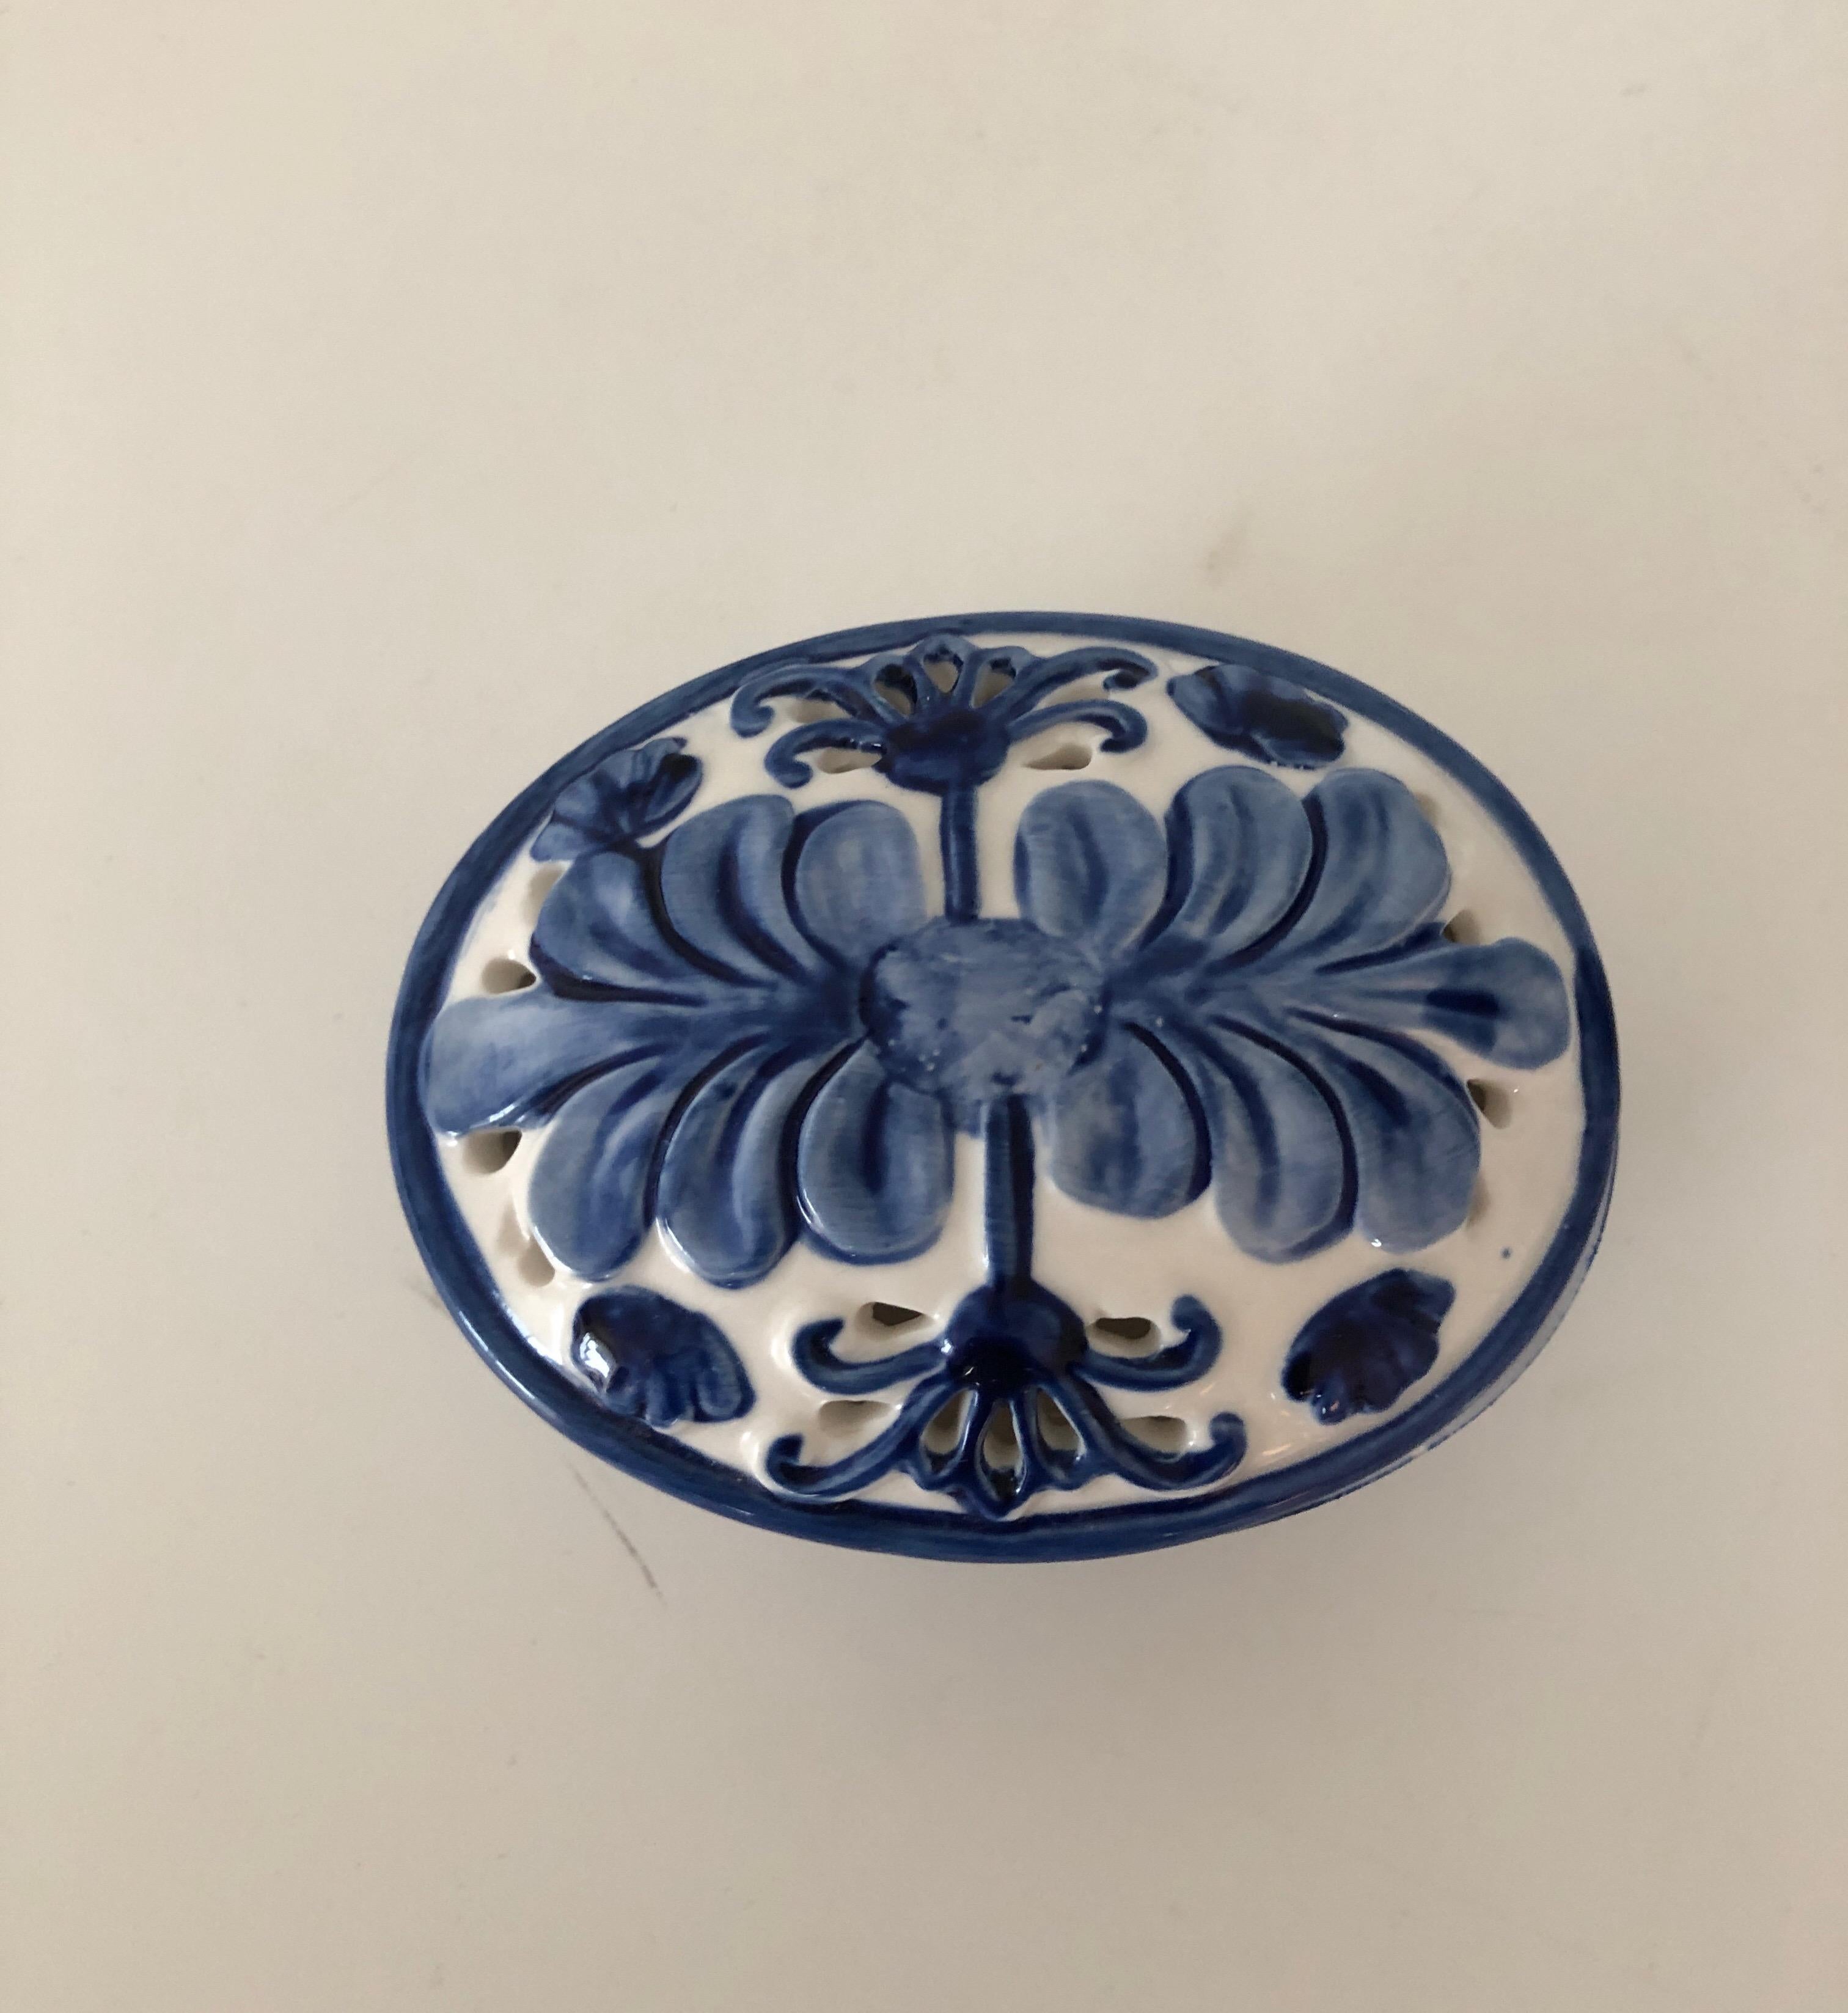 Small blue and white patterned trinket box with perforated holes. 
Signed by Blue Deco and hand painted in Holland.
Measures: 4.5